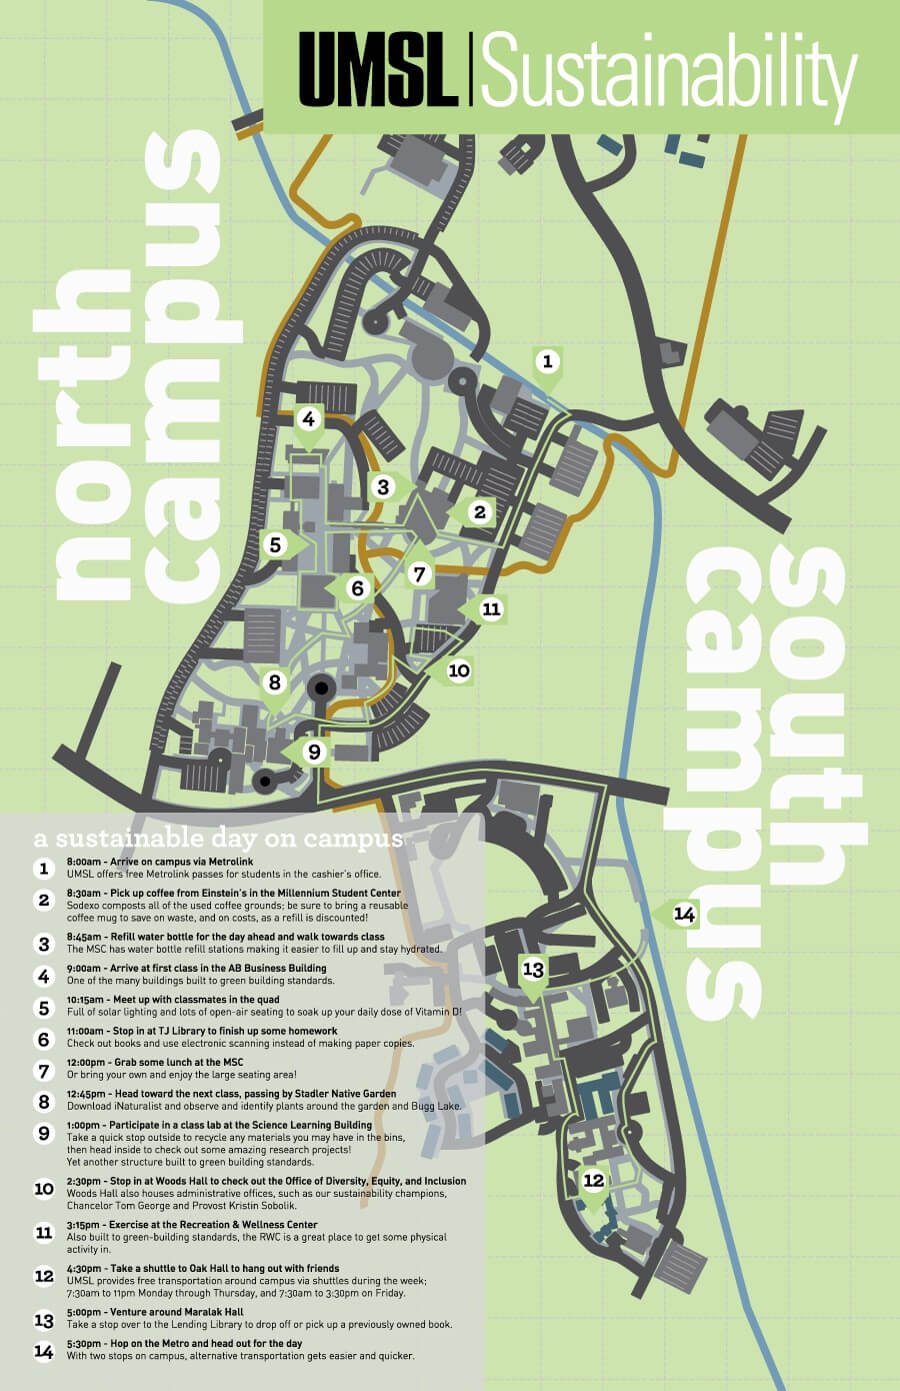 umsl map south campus Map Of Sustainability Features On Campus umsl map south campus